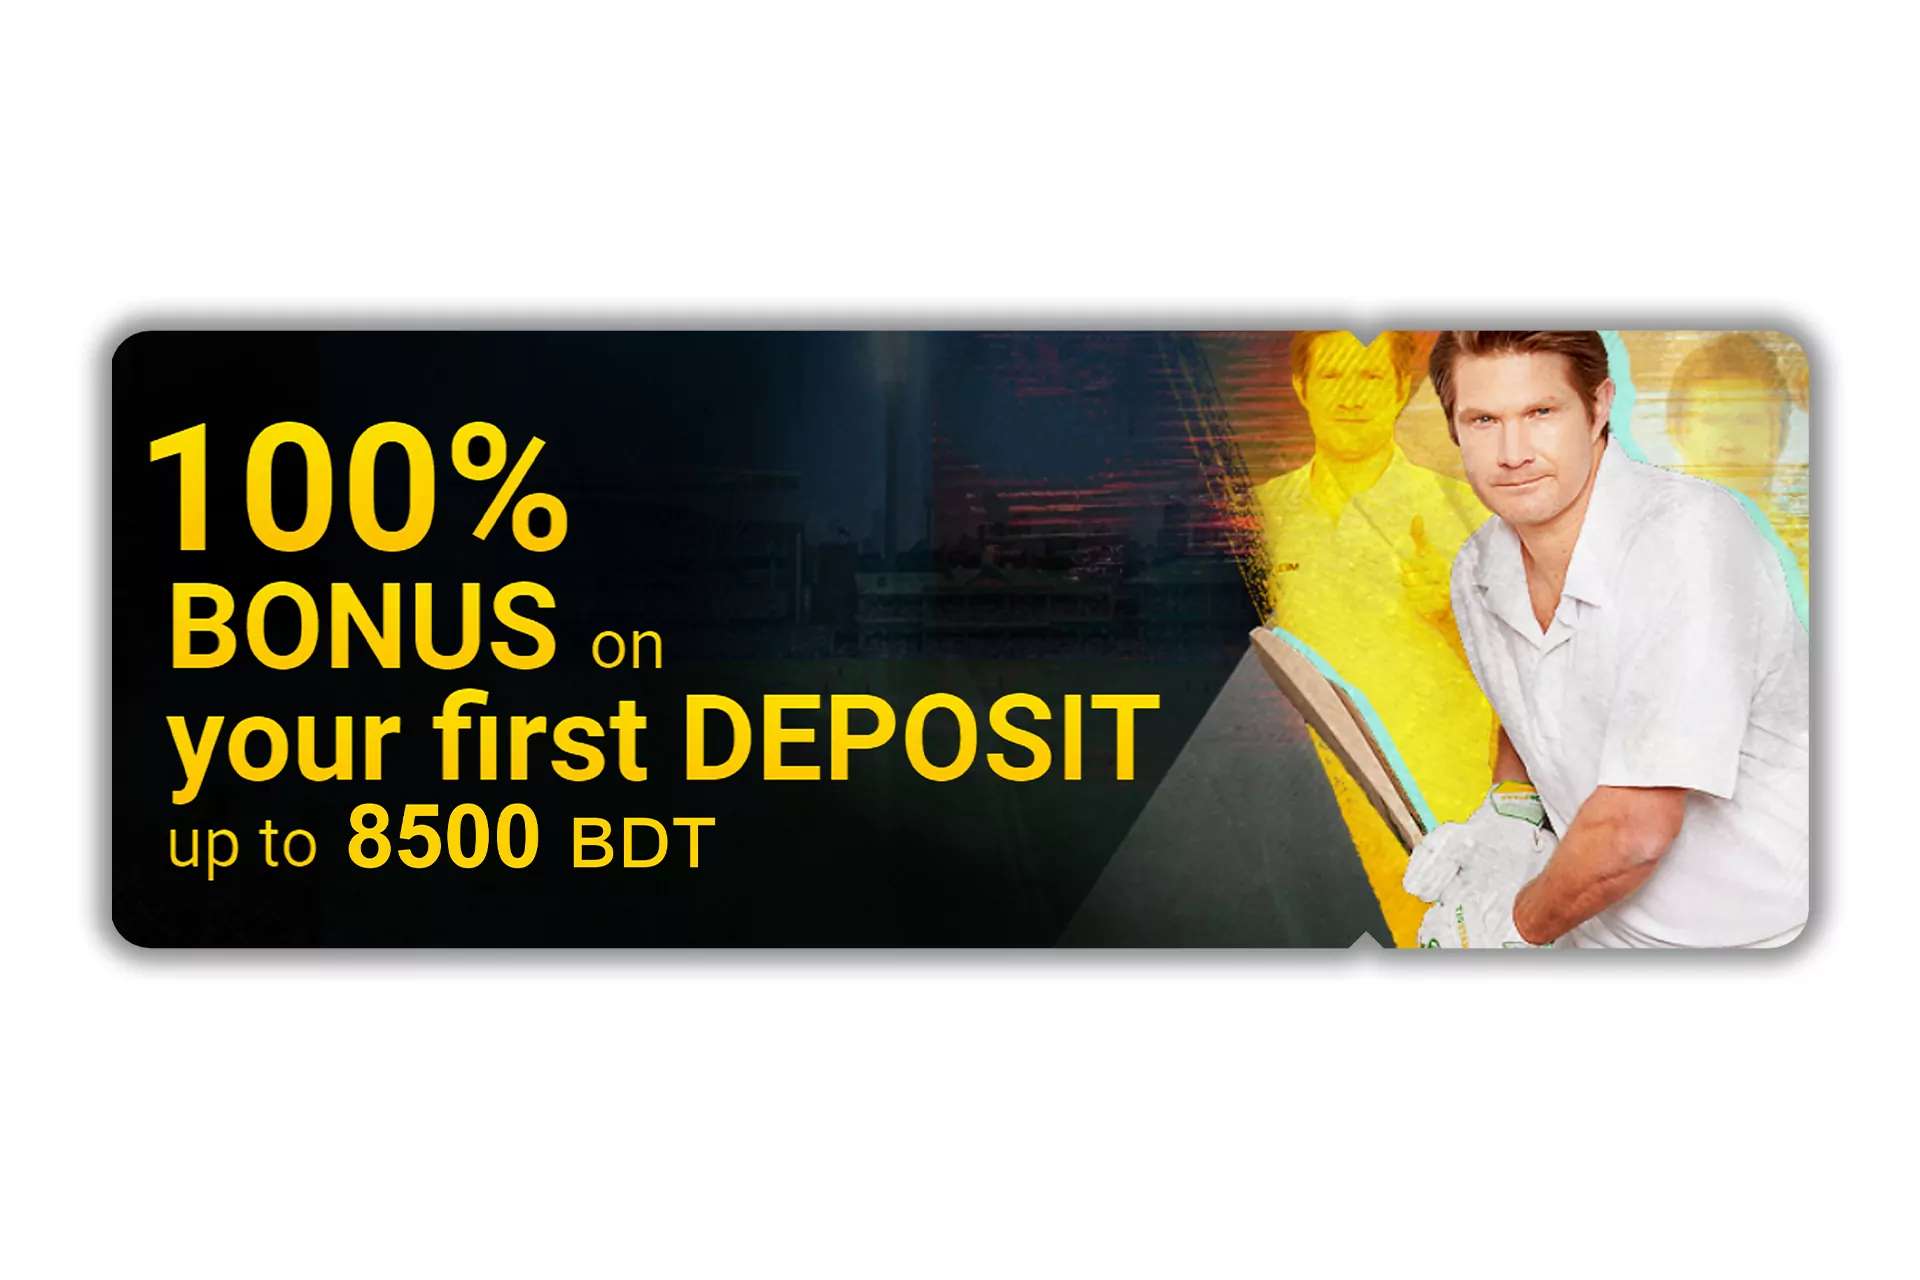 If you are a new user, don't miss the chance to get up to 8500 BDT after your first deposit at Melbet.